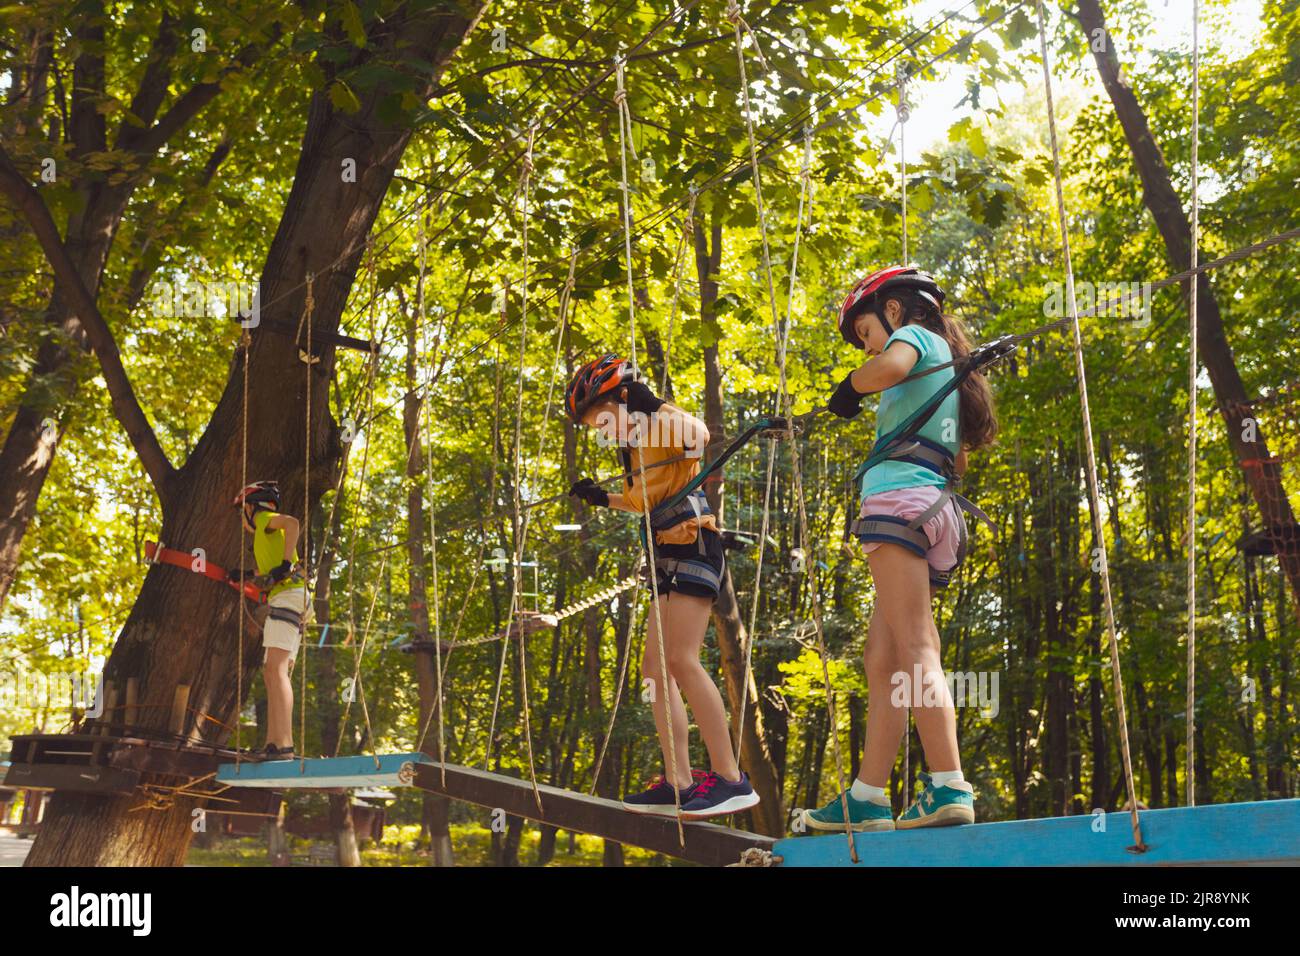 The little children in protective helmets step on the suspension bridge and hold on to the ropes Stock Photo